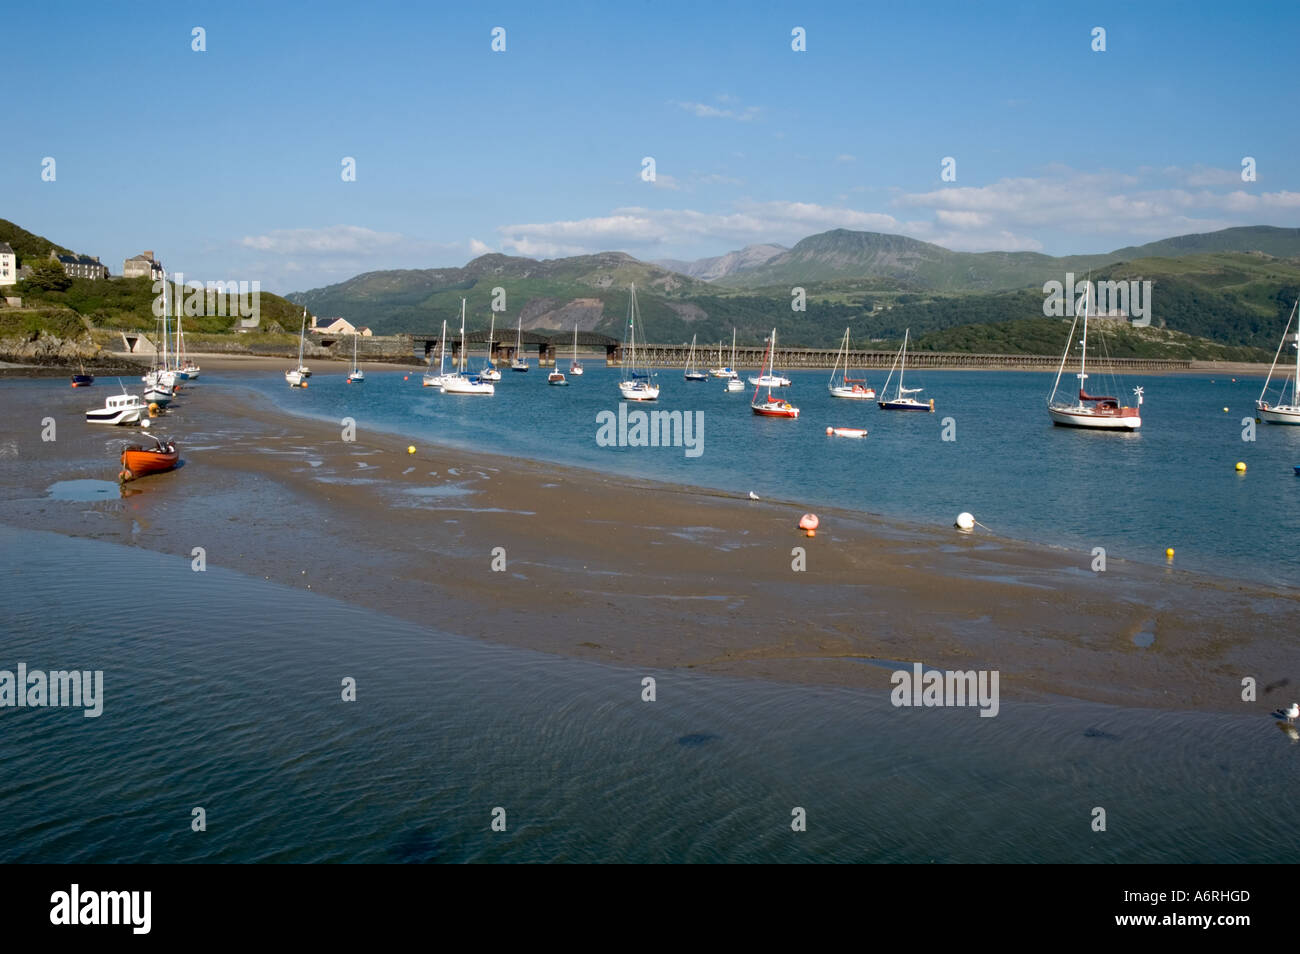 landscape of river estuary at low tide on bright sunny day with yachts at moorings Stock Photo